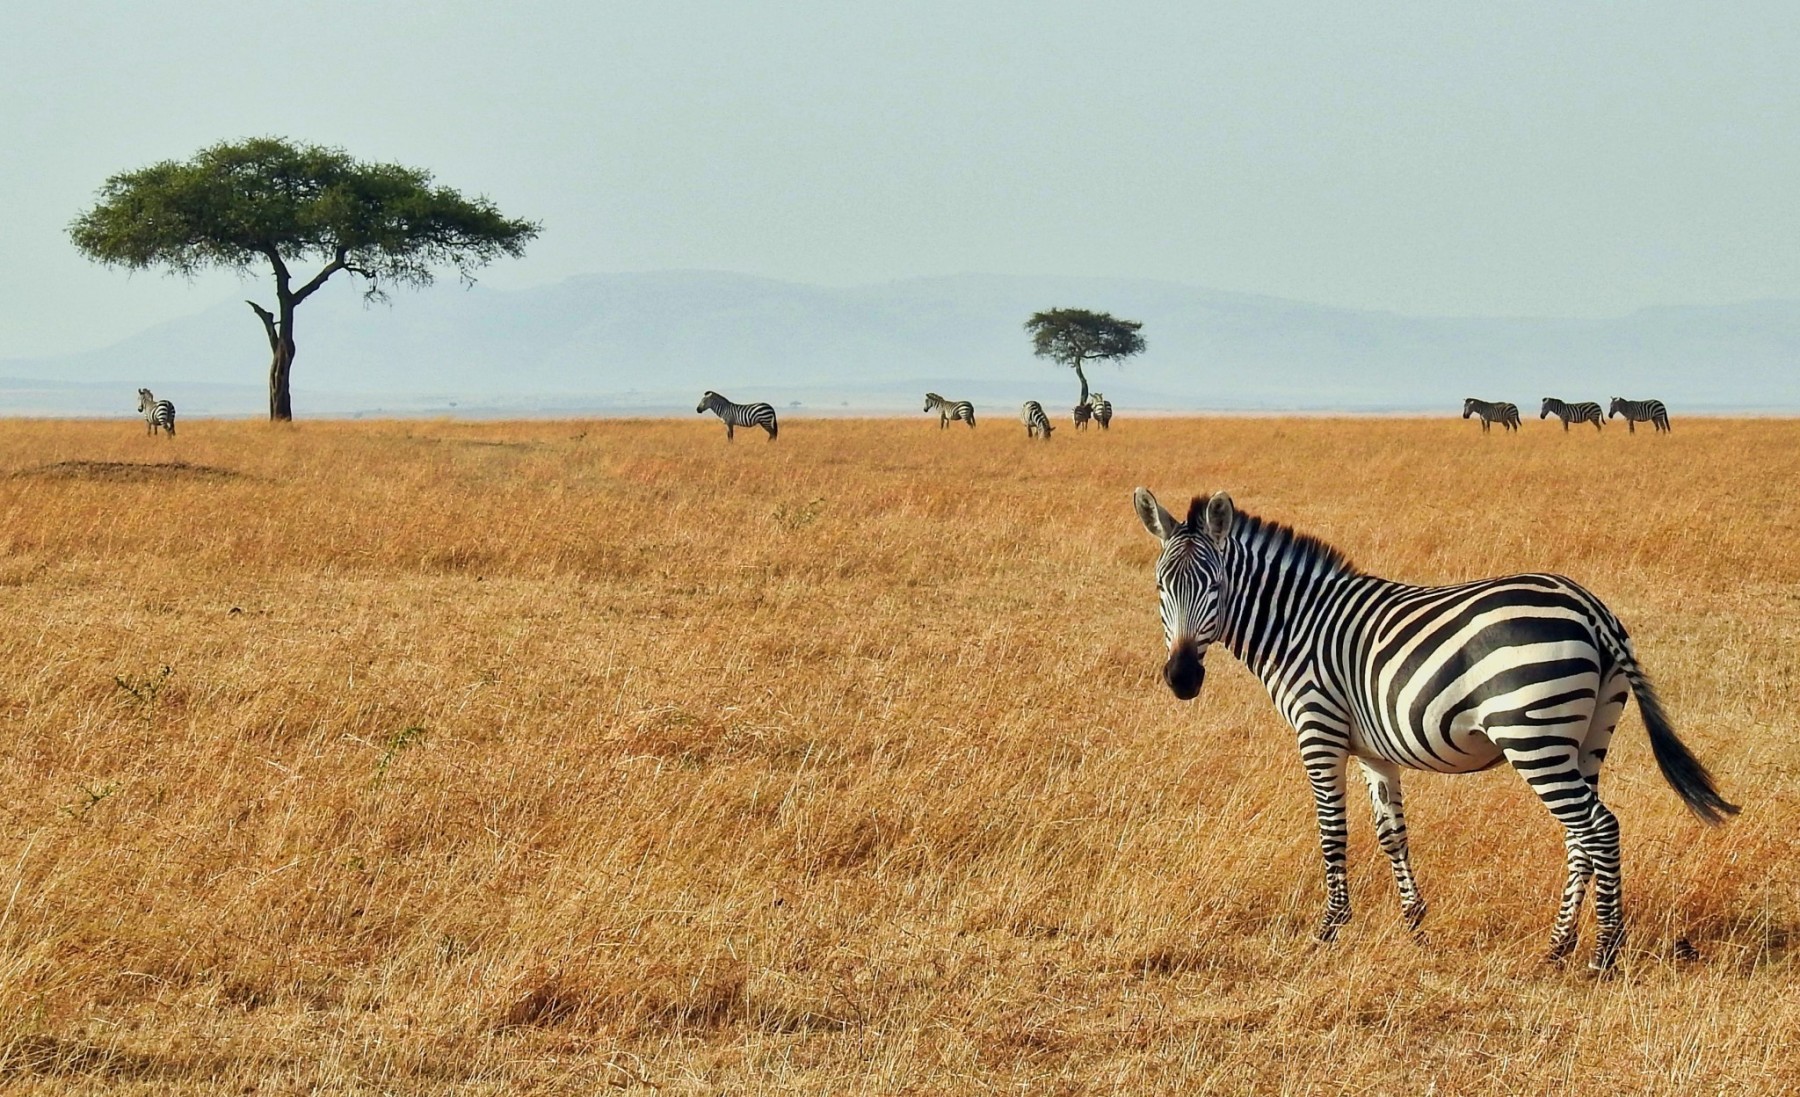 Should I go on safari in East or southern Africa? - African Portfolio